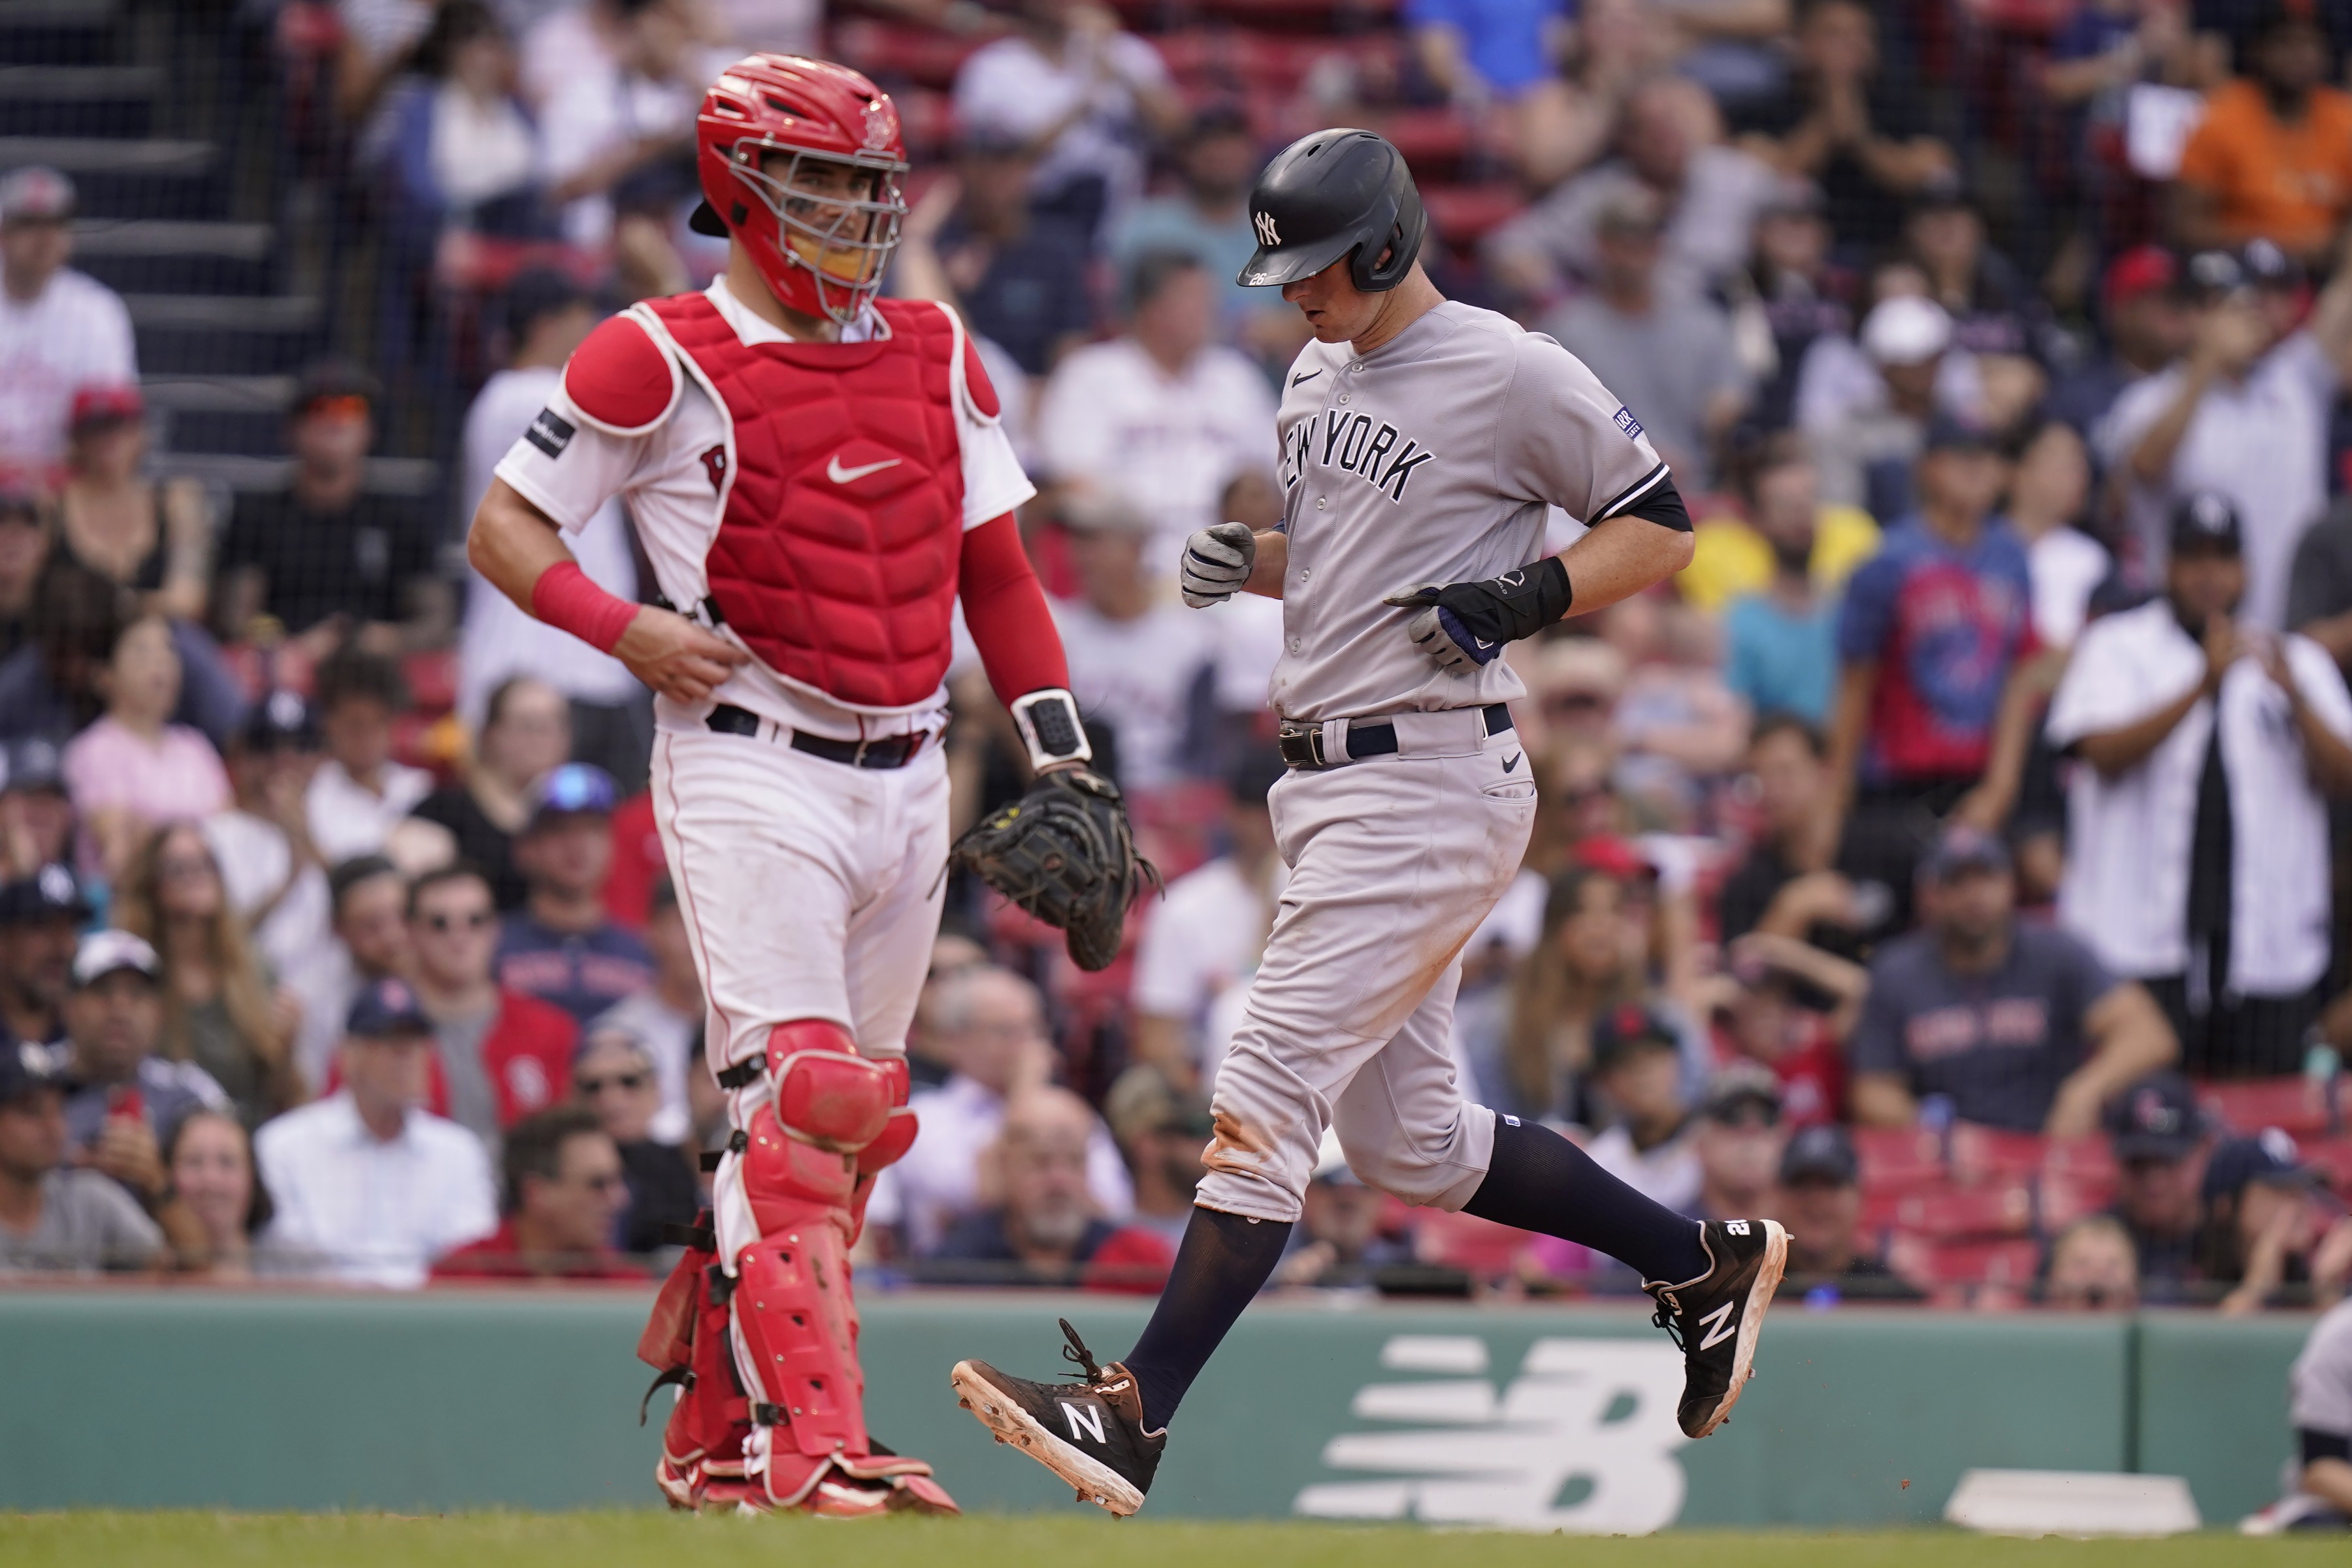 Red Sox-Yankees opener rained out; game to be made up Tuesday